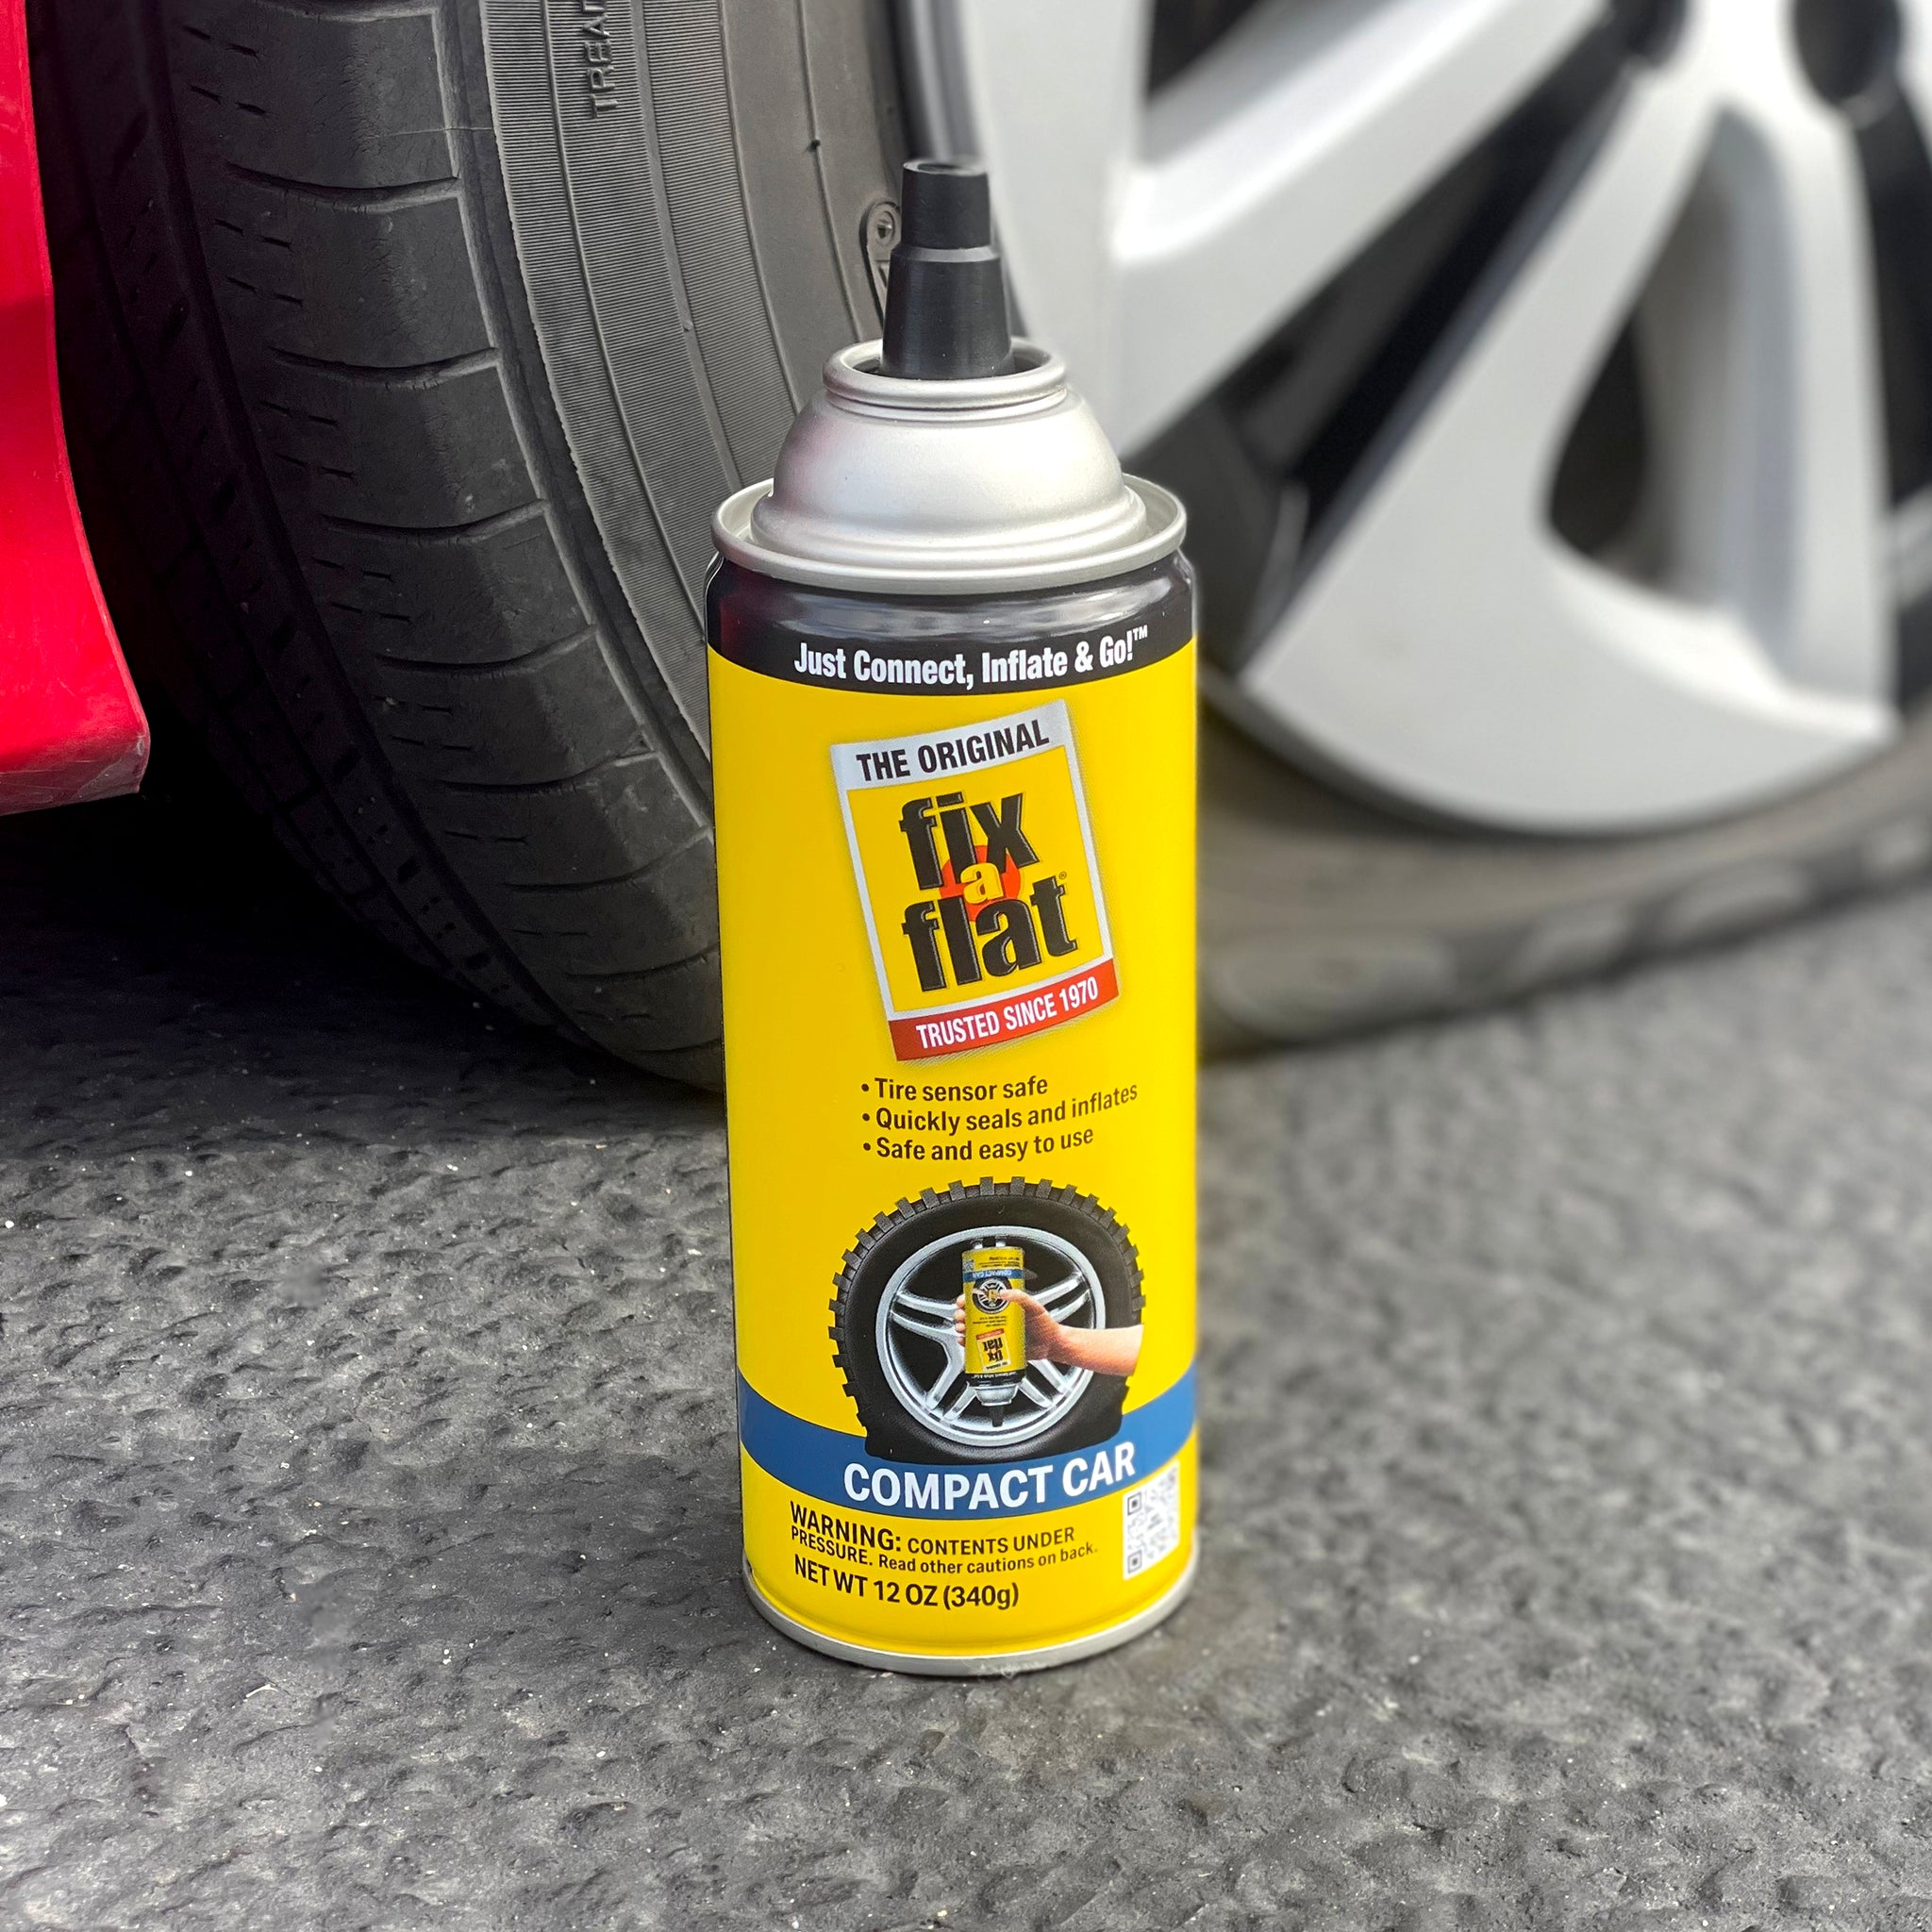 Compact Tire Inflator